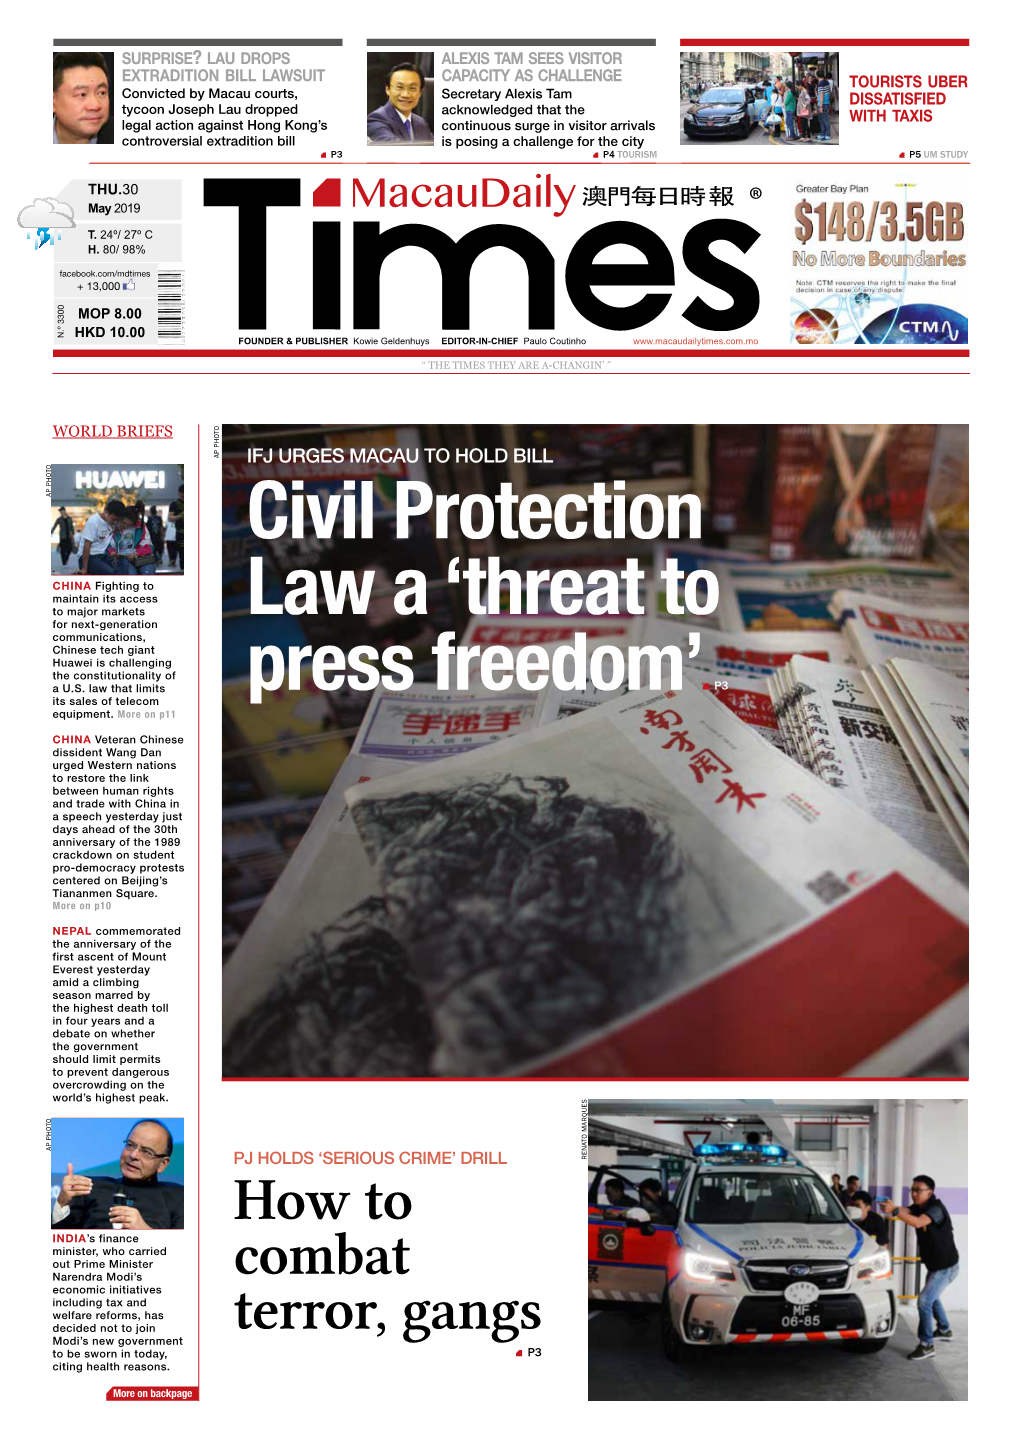 Civil Protection Law a 'Threat to Press Freedom'